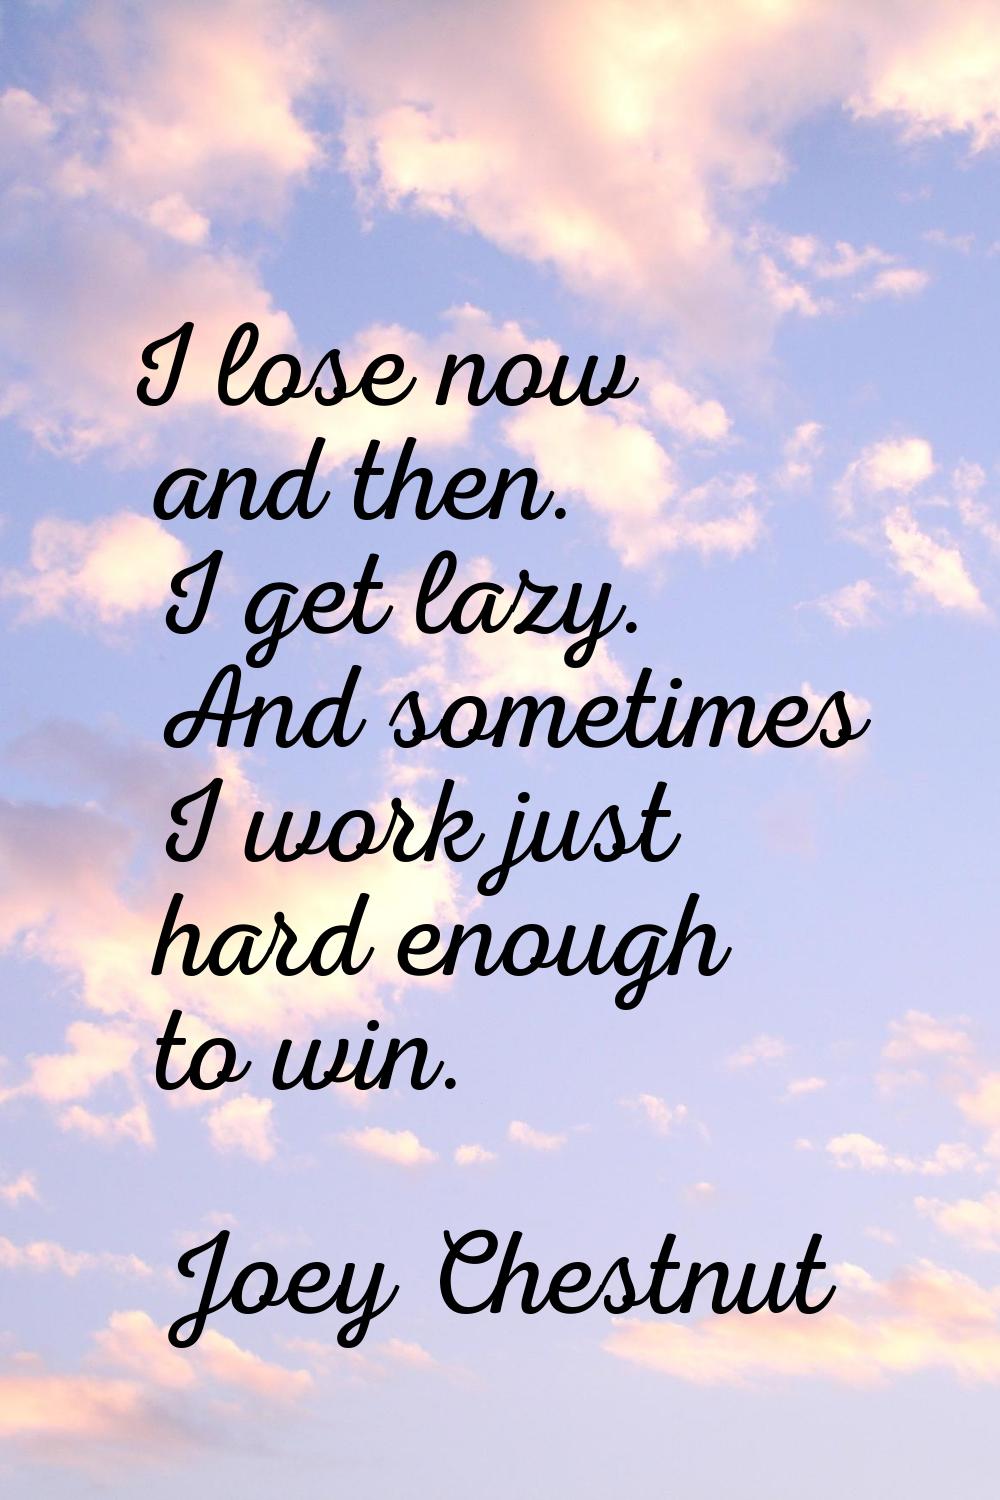 I lose now and then. I get lazy. And sometimes I work just hard enough to win.